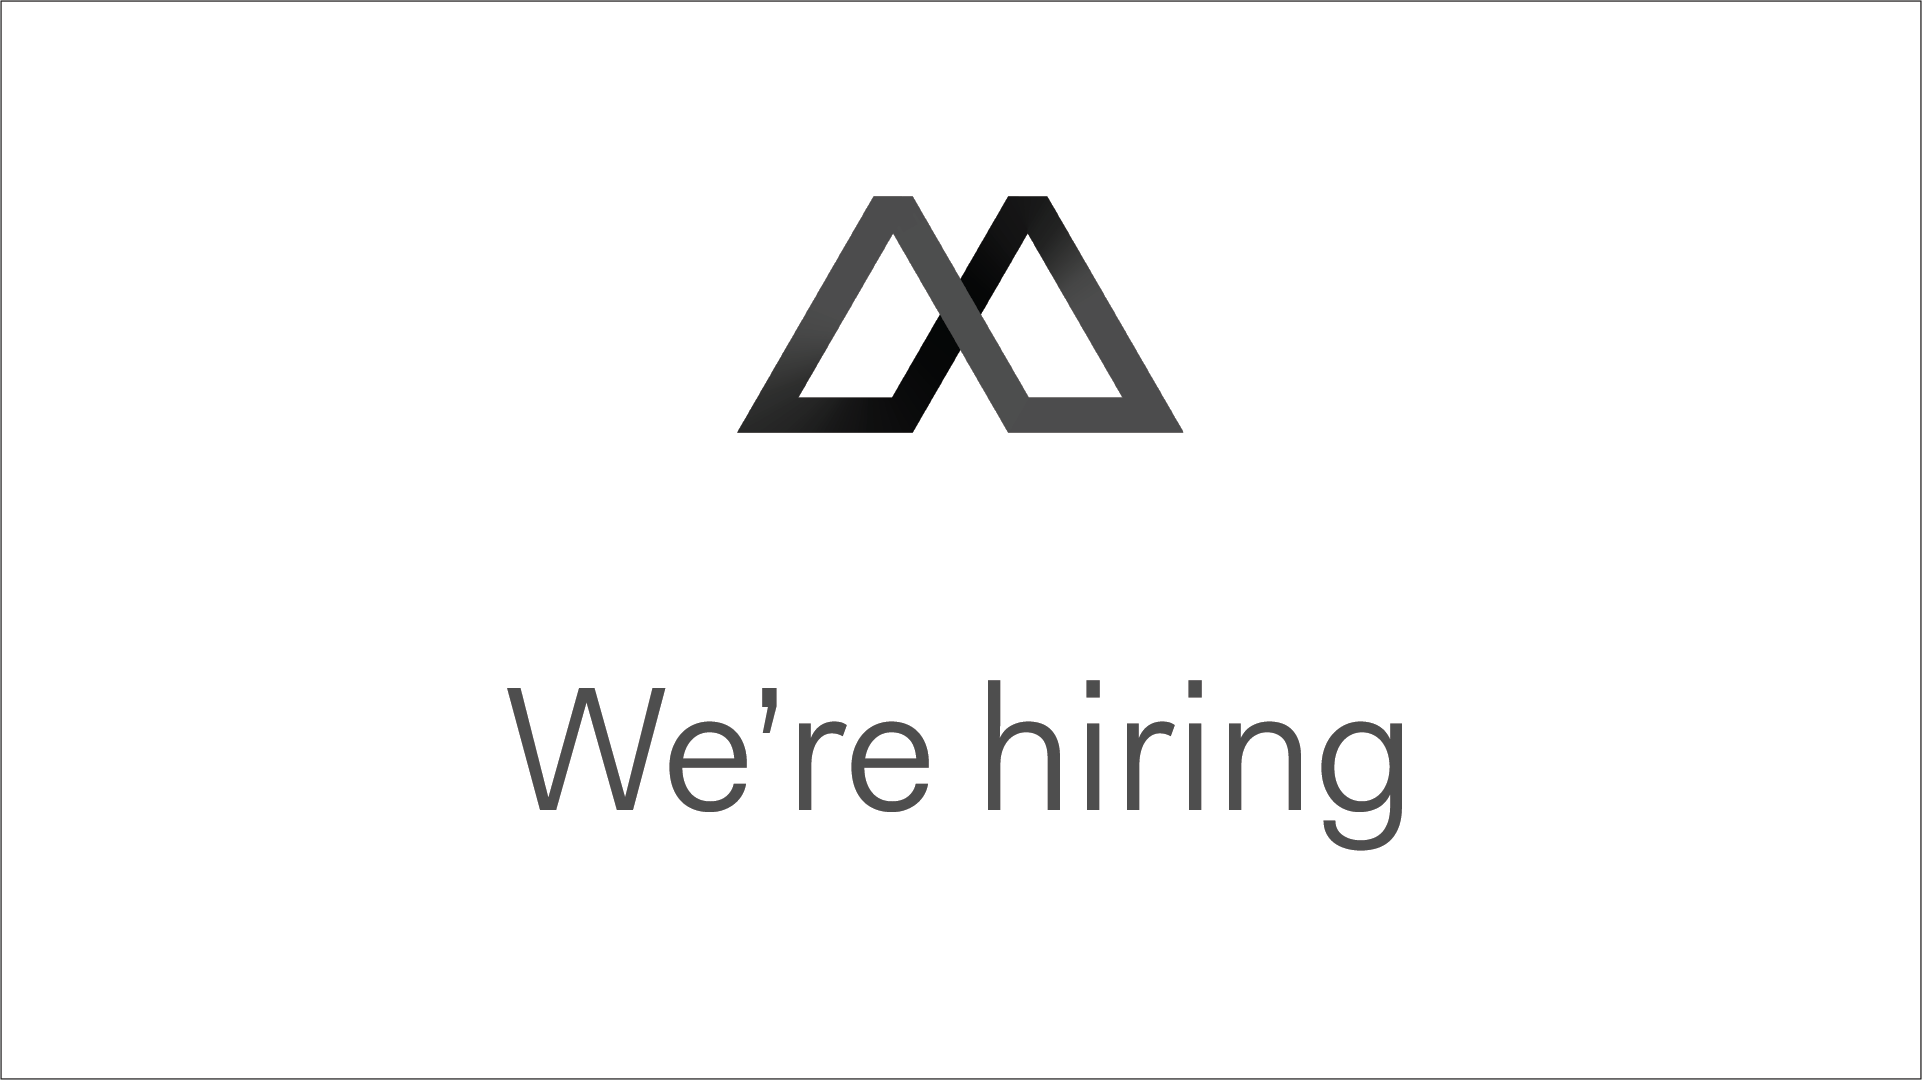 Manto logo advertising that the company is hiring